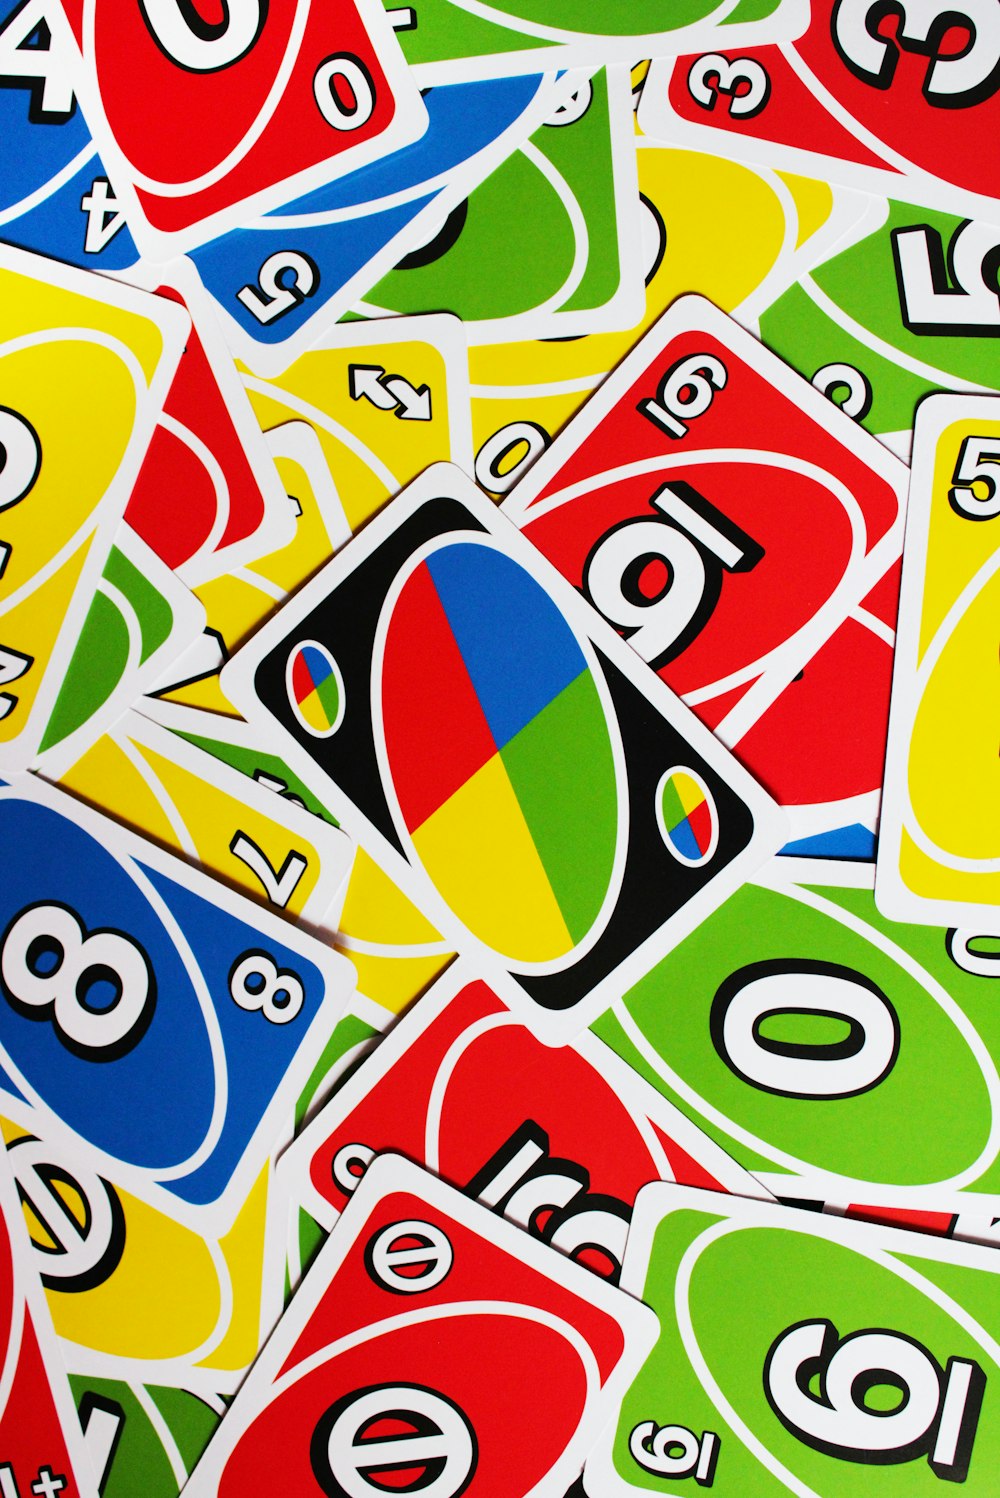 Uno Cards Pictures | Download Free Images on Unsplash